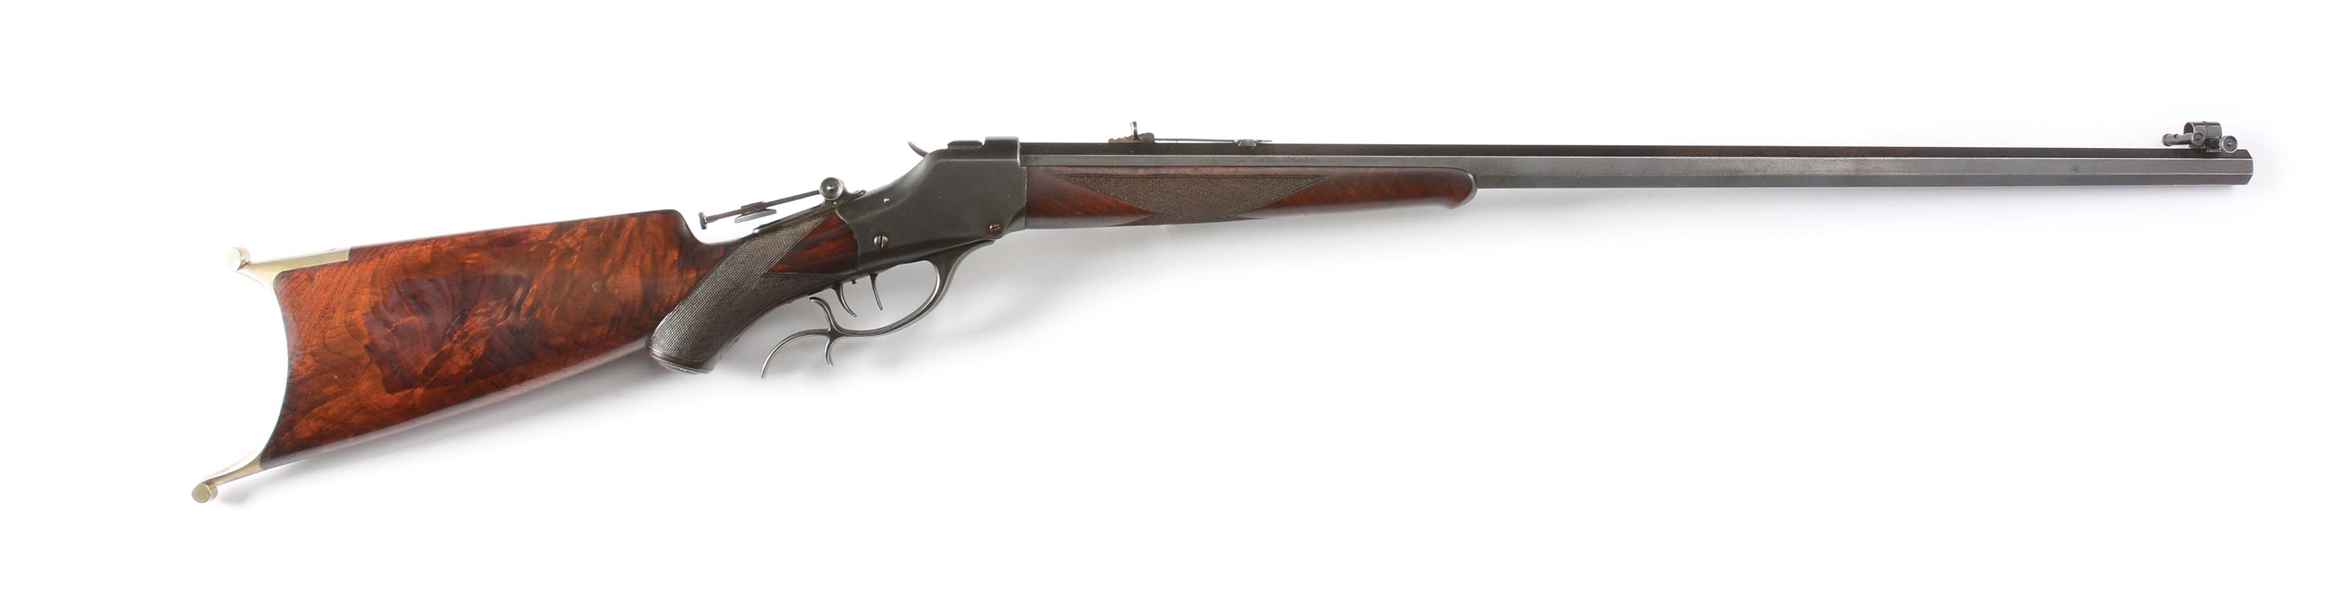 (C) WINCHESTER THICK WALL HI-WALL SPECIAL SPORTING MODEL SINGLE SHOT RIFLE.